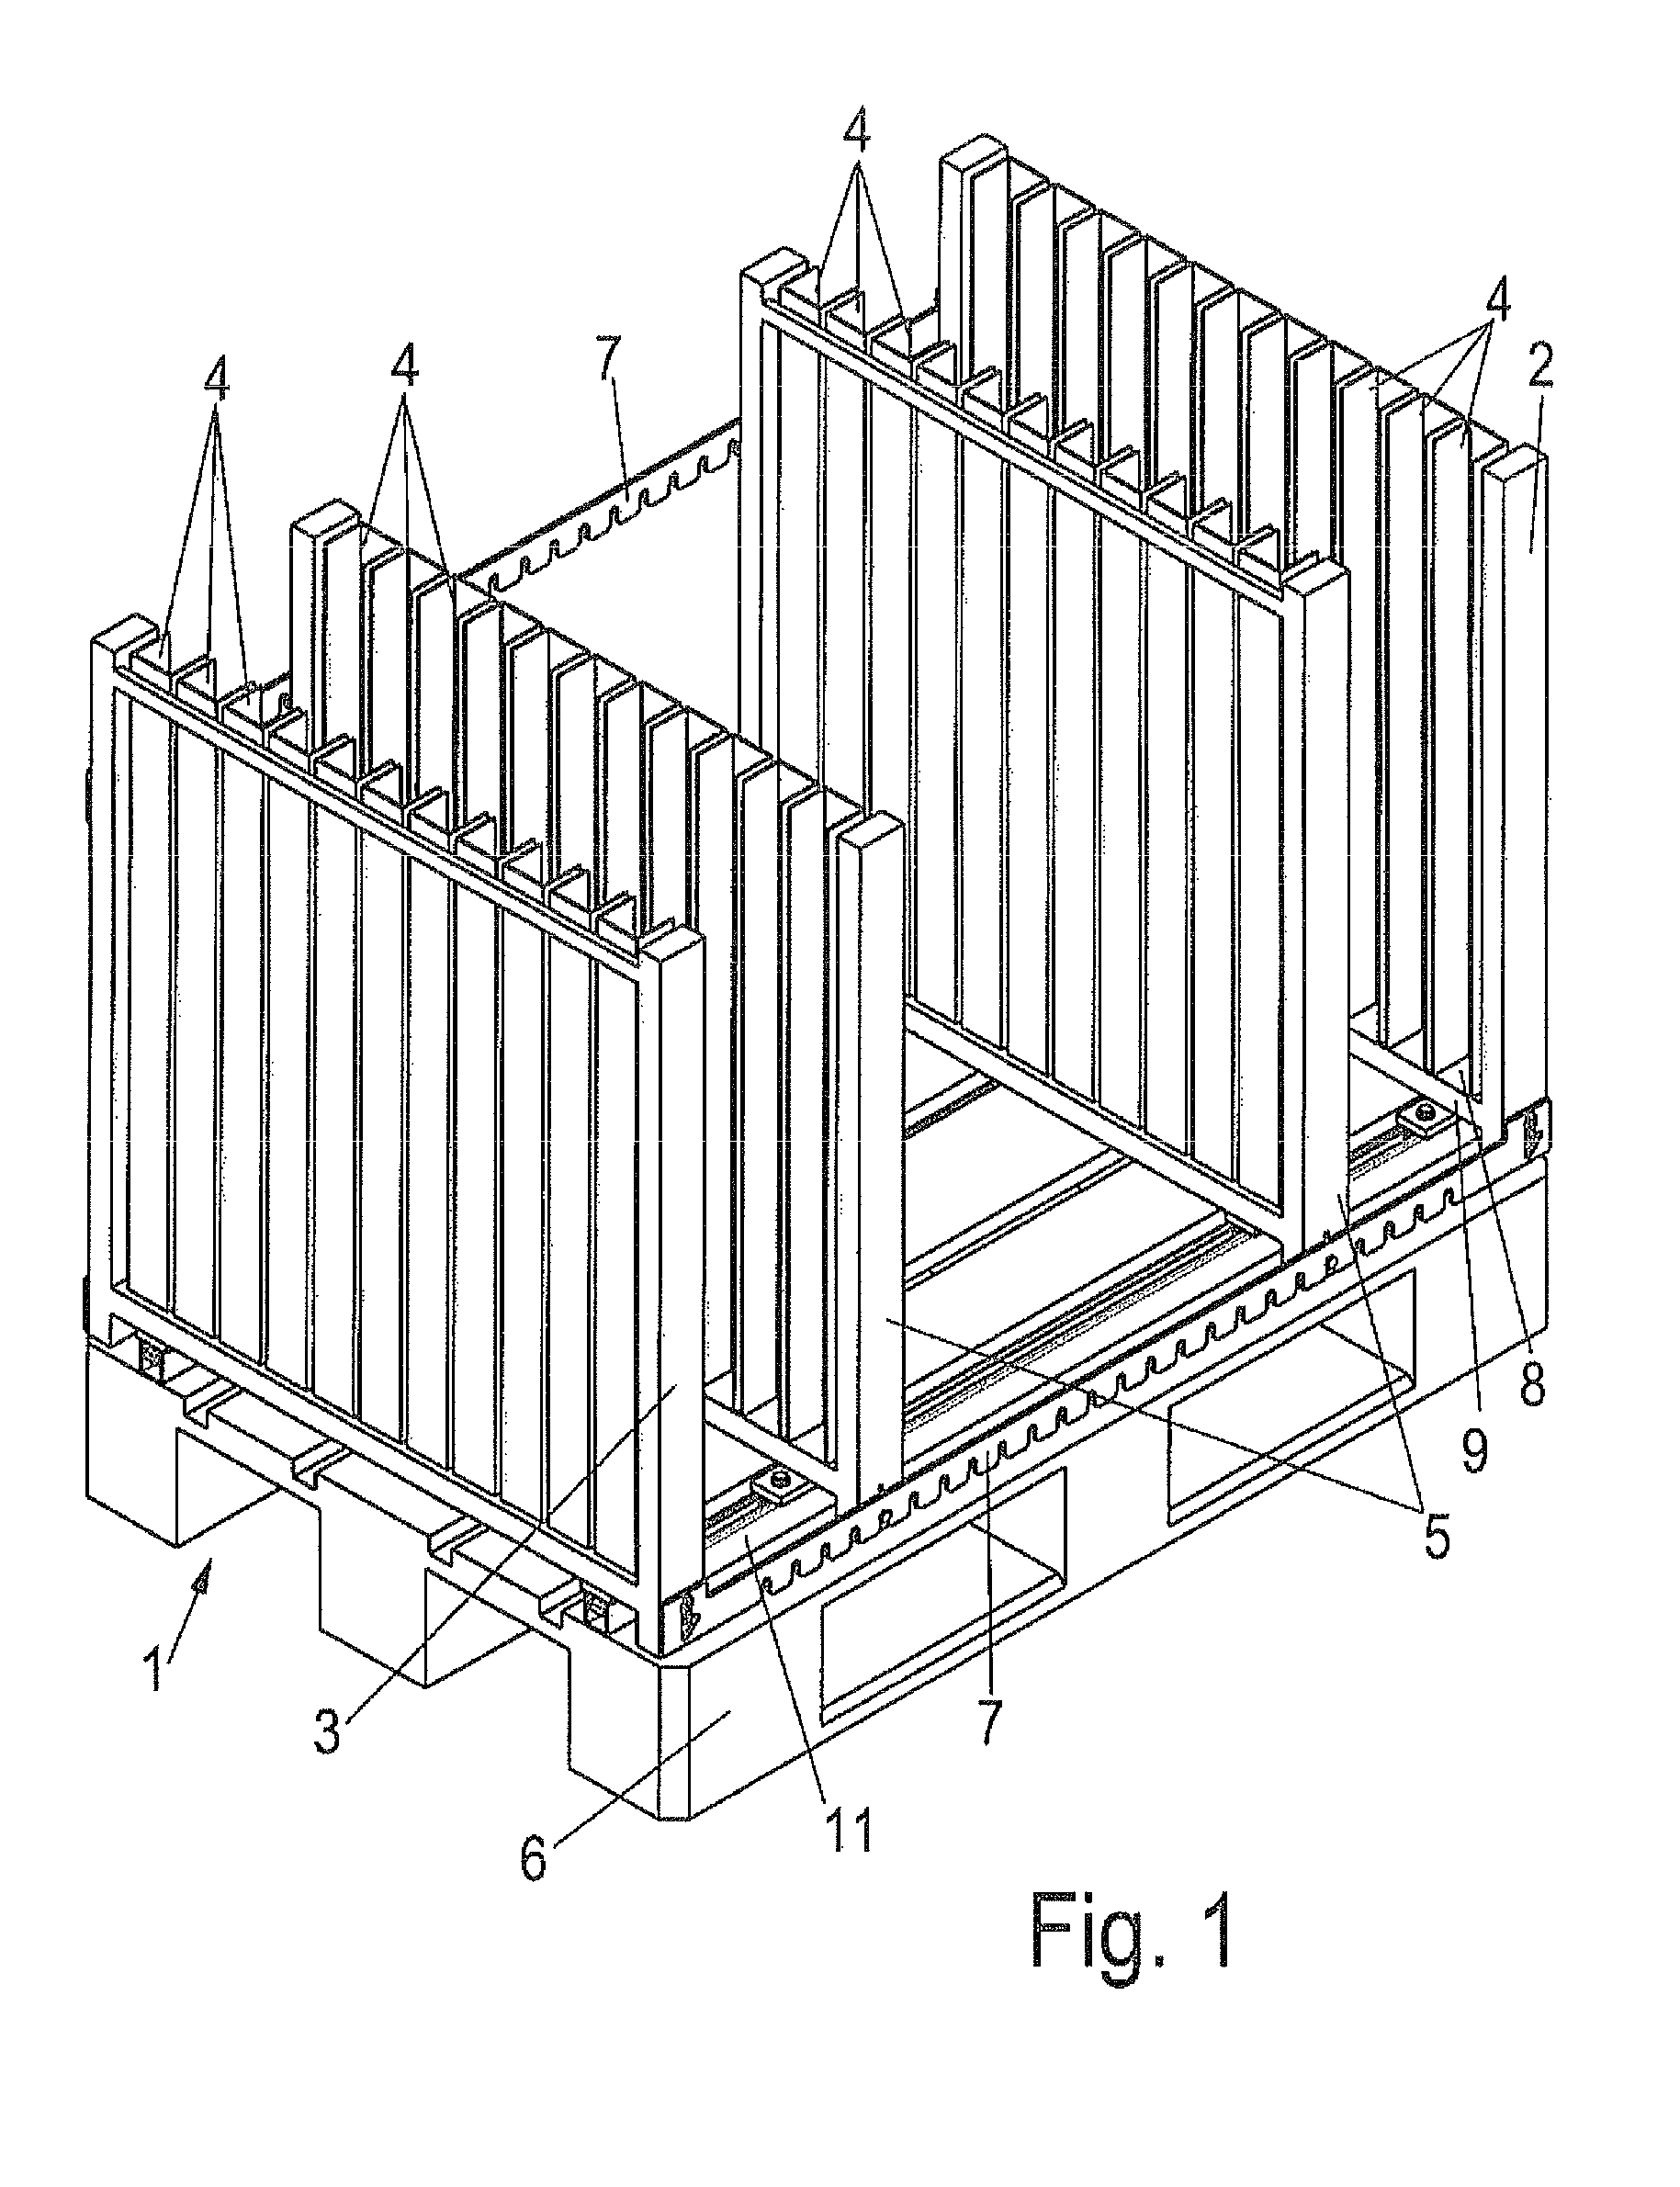 Device for transporting objects